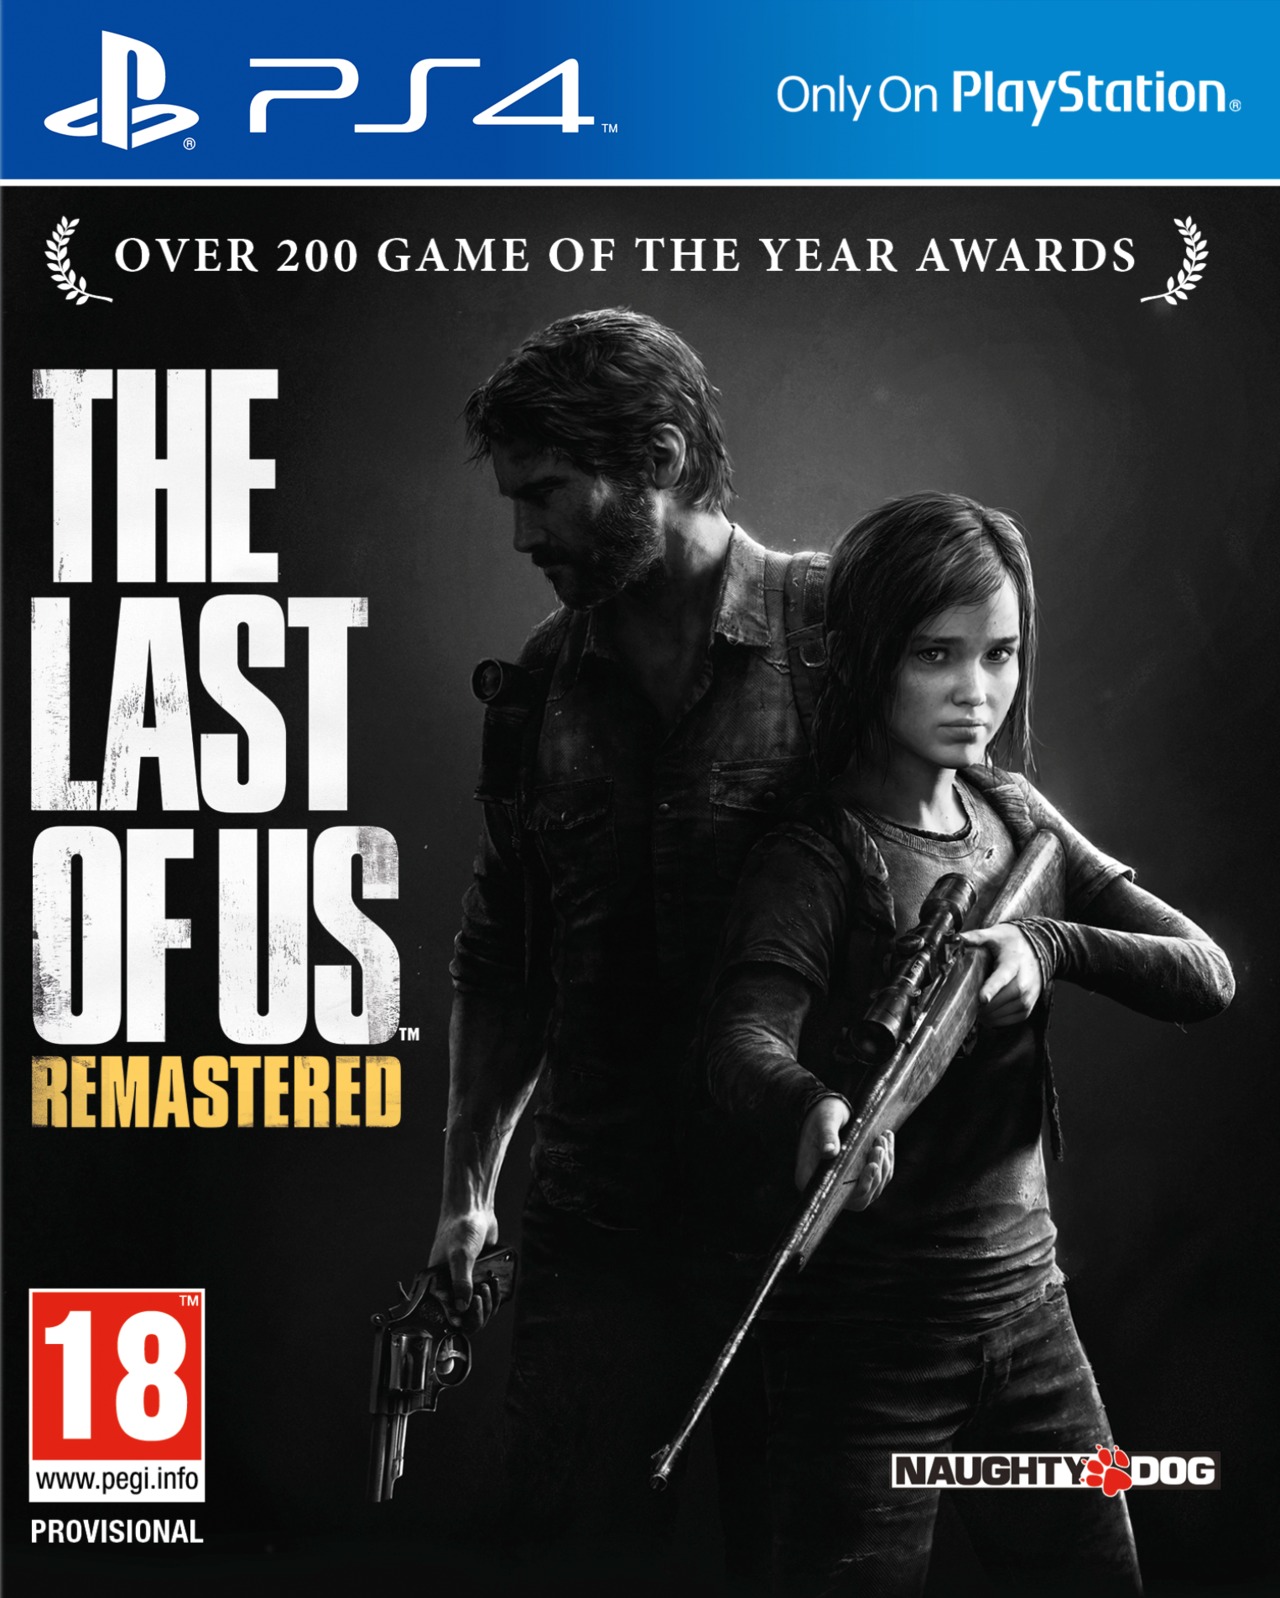 http://image.jeuxvideo.com/images/jaquettes/00052332/jaquette-the-last-of-us-remastered-playstation-4-ps4-cover-avant-g-1397063678.jpg